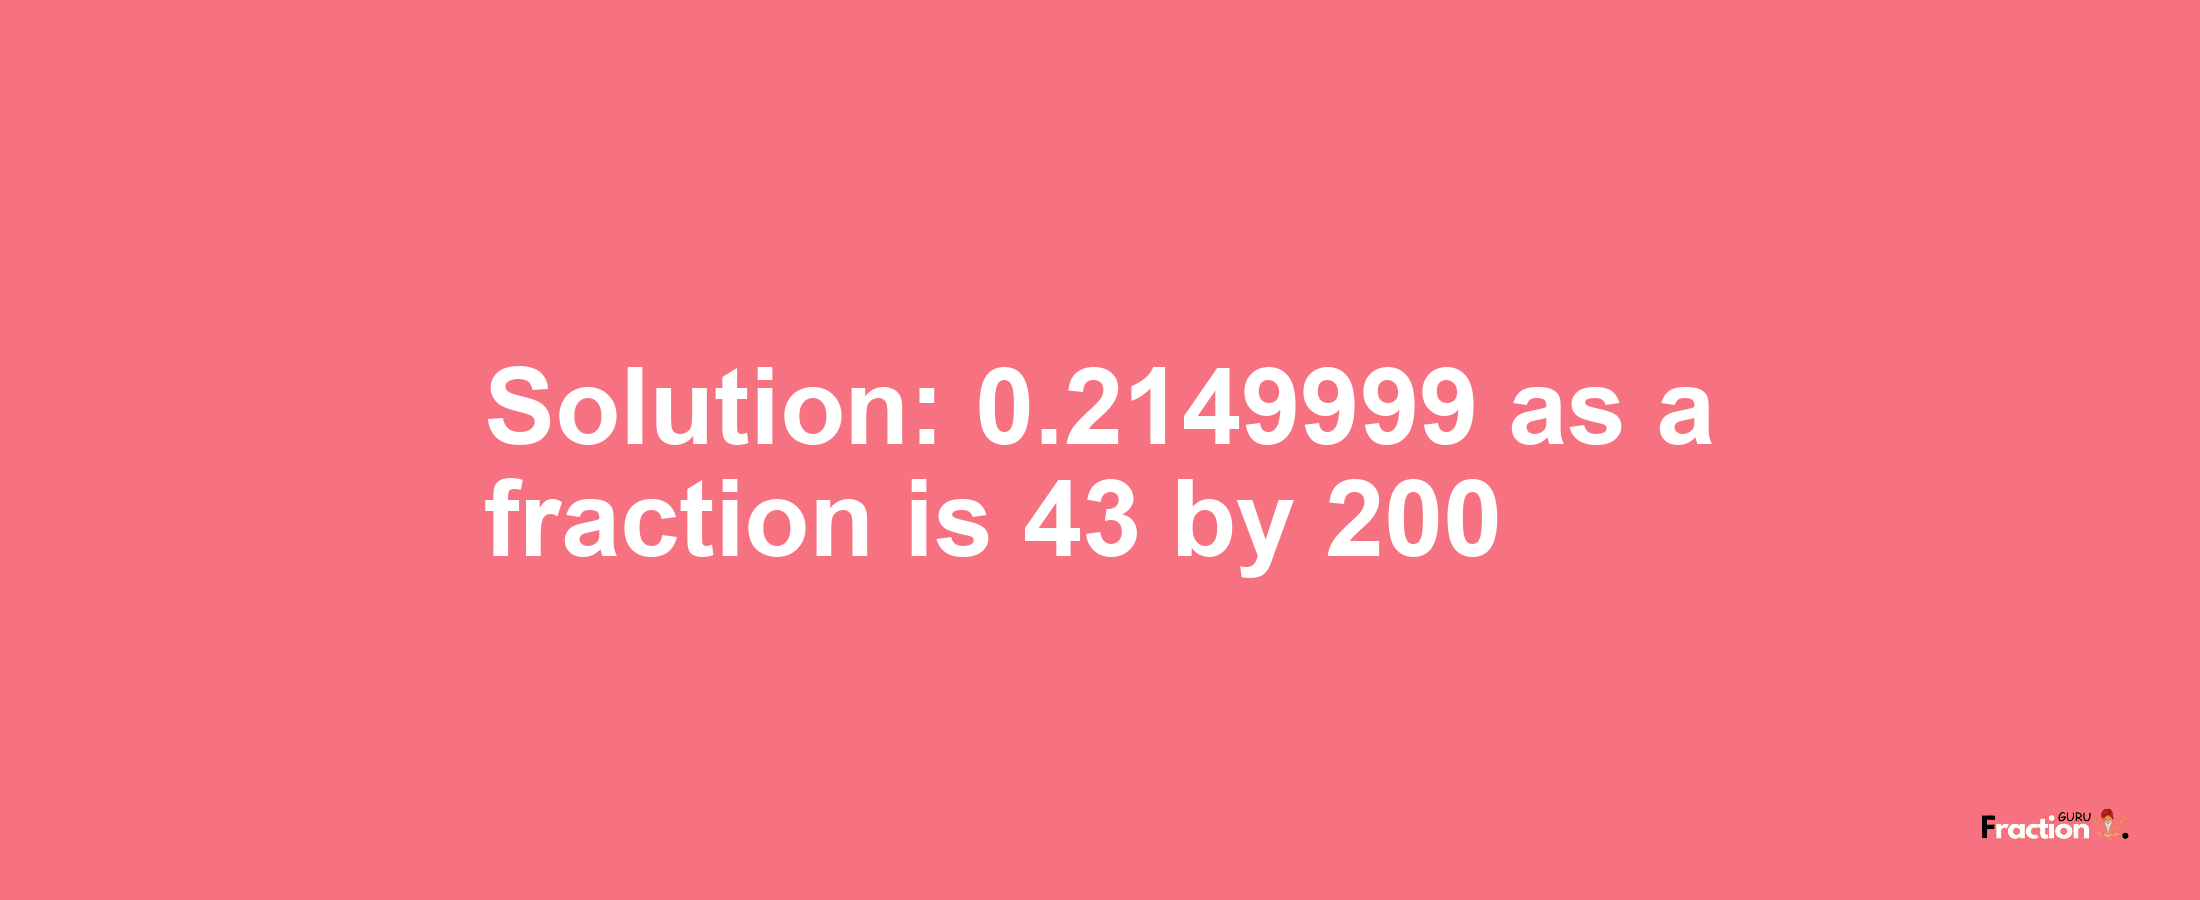 Solution:0.2149999 as a fraction is 43/200